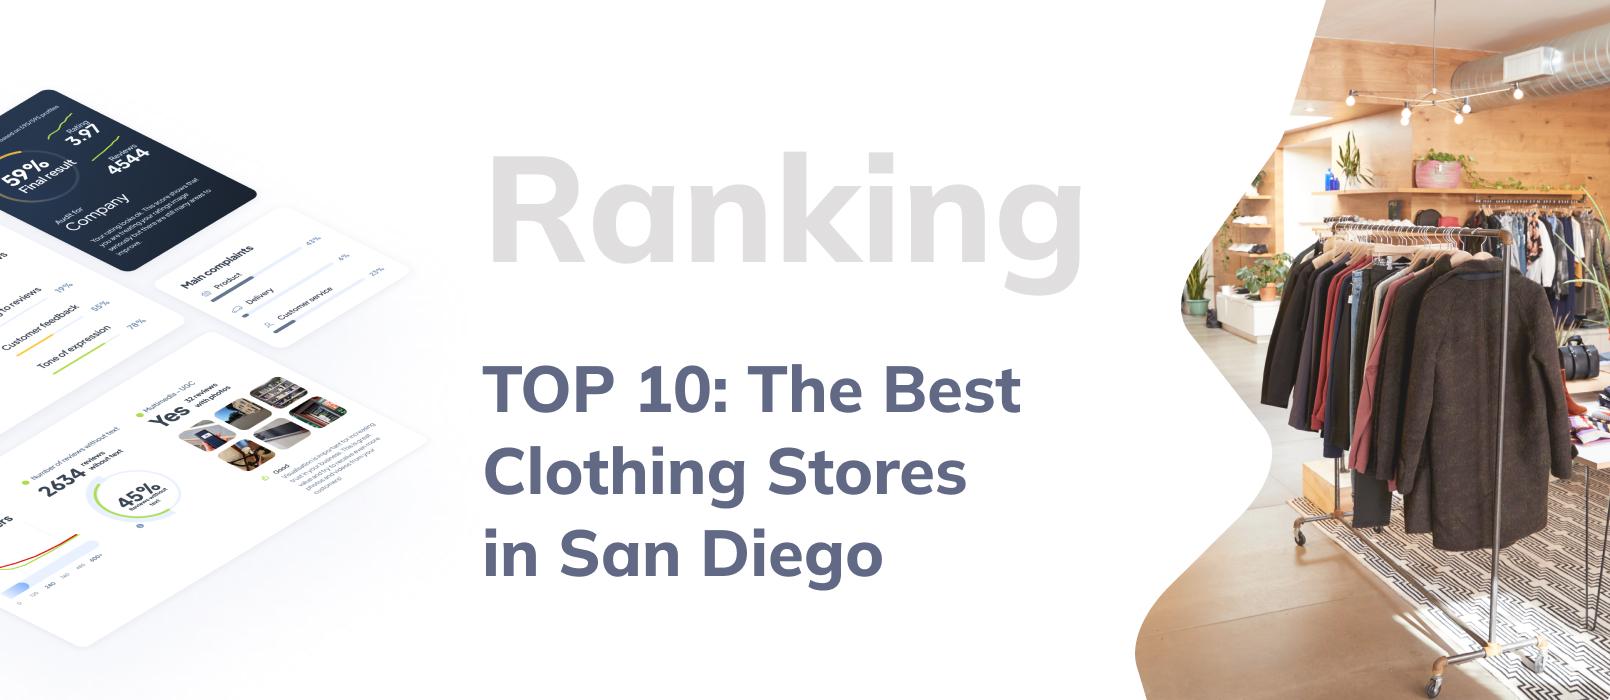 Best clothing stores in San Diego – TOP 10 ranking